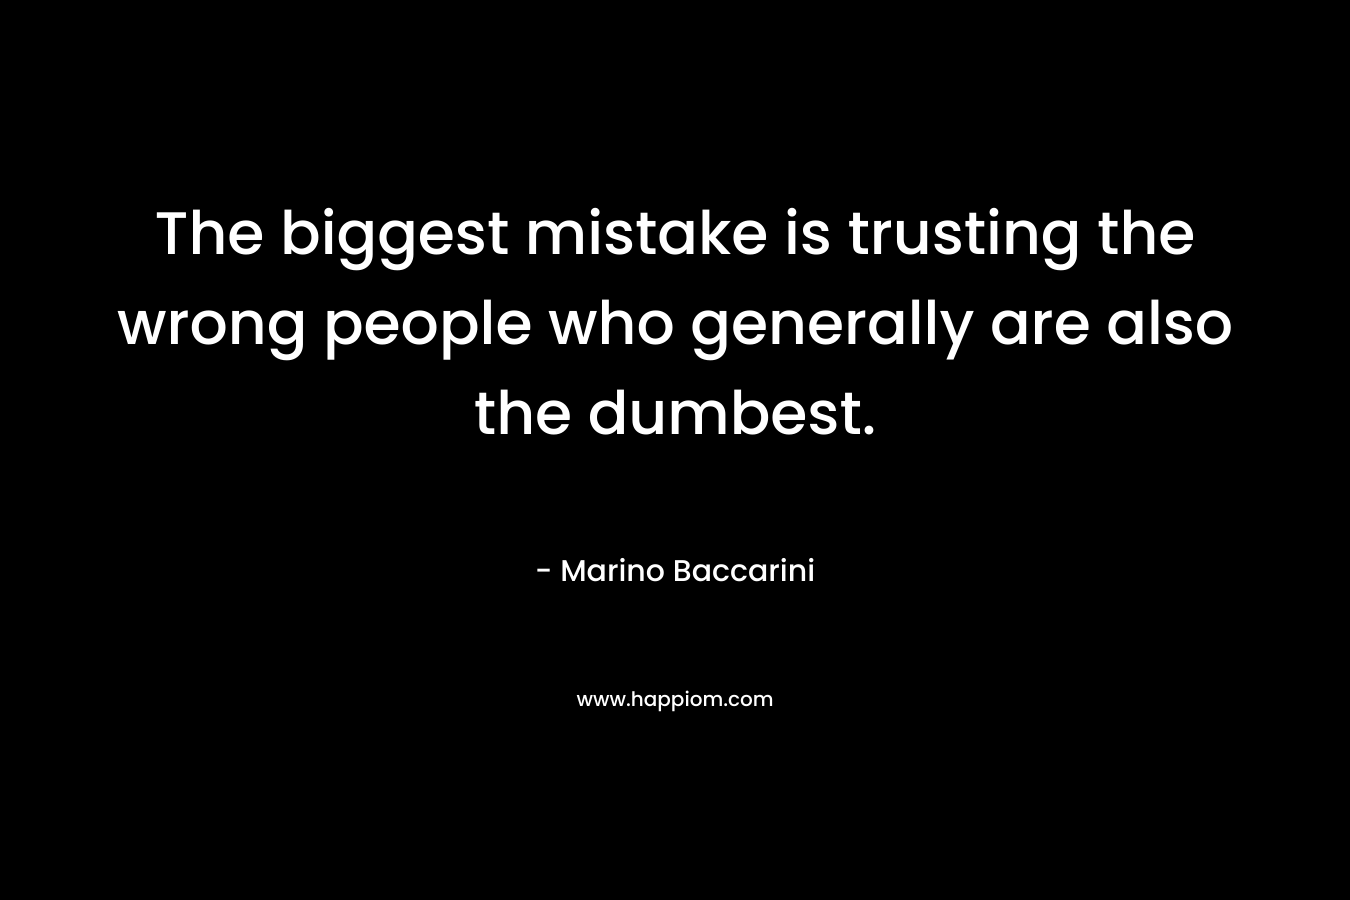 The biggest mistake is trusting the wrong people who generally are also the dumbest.